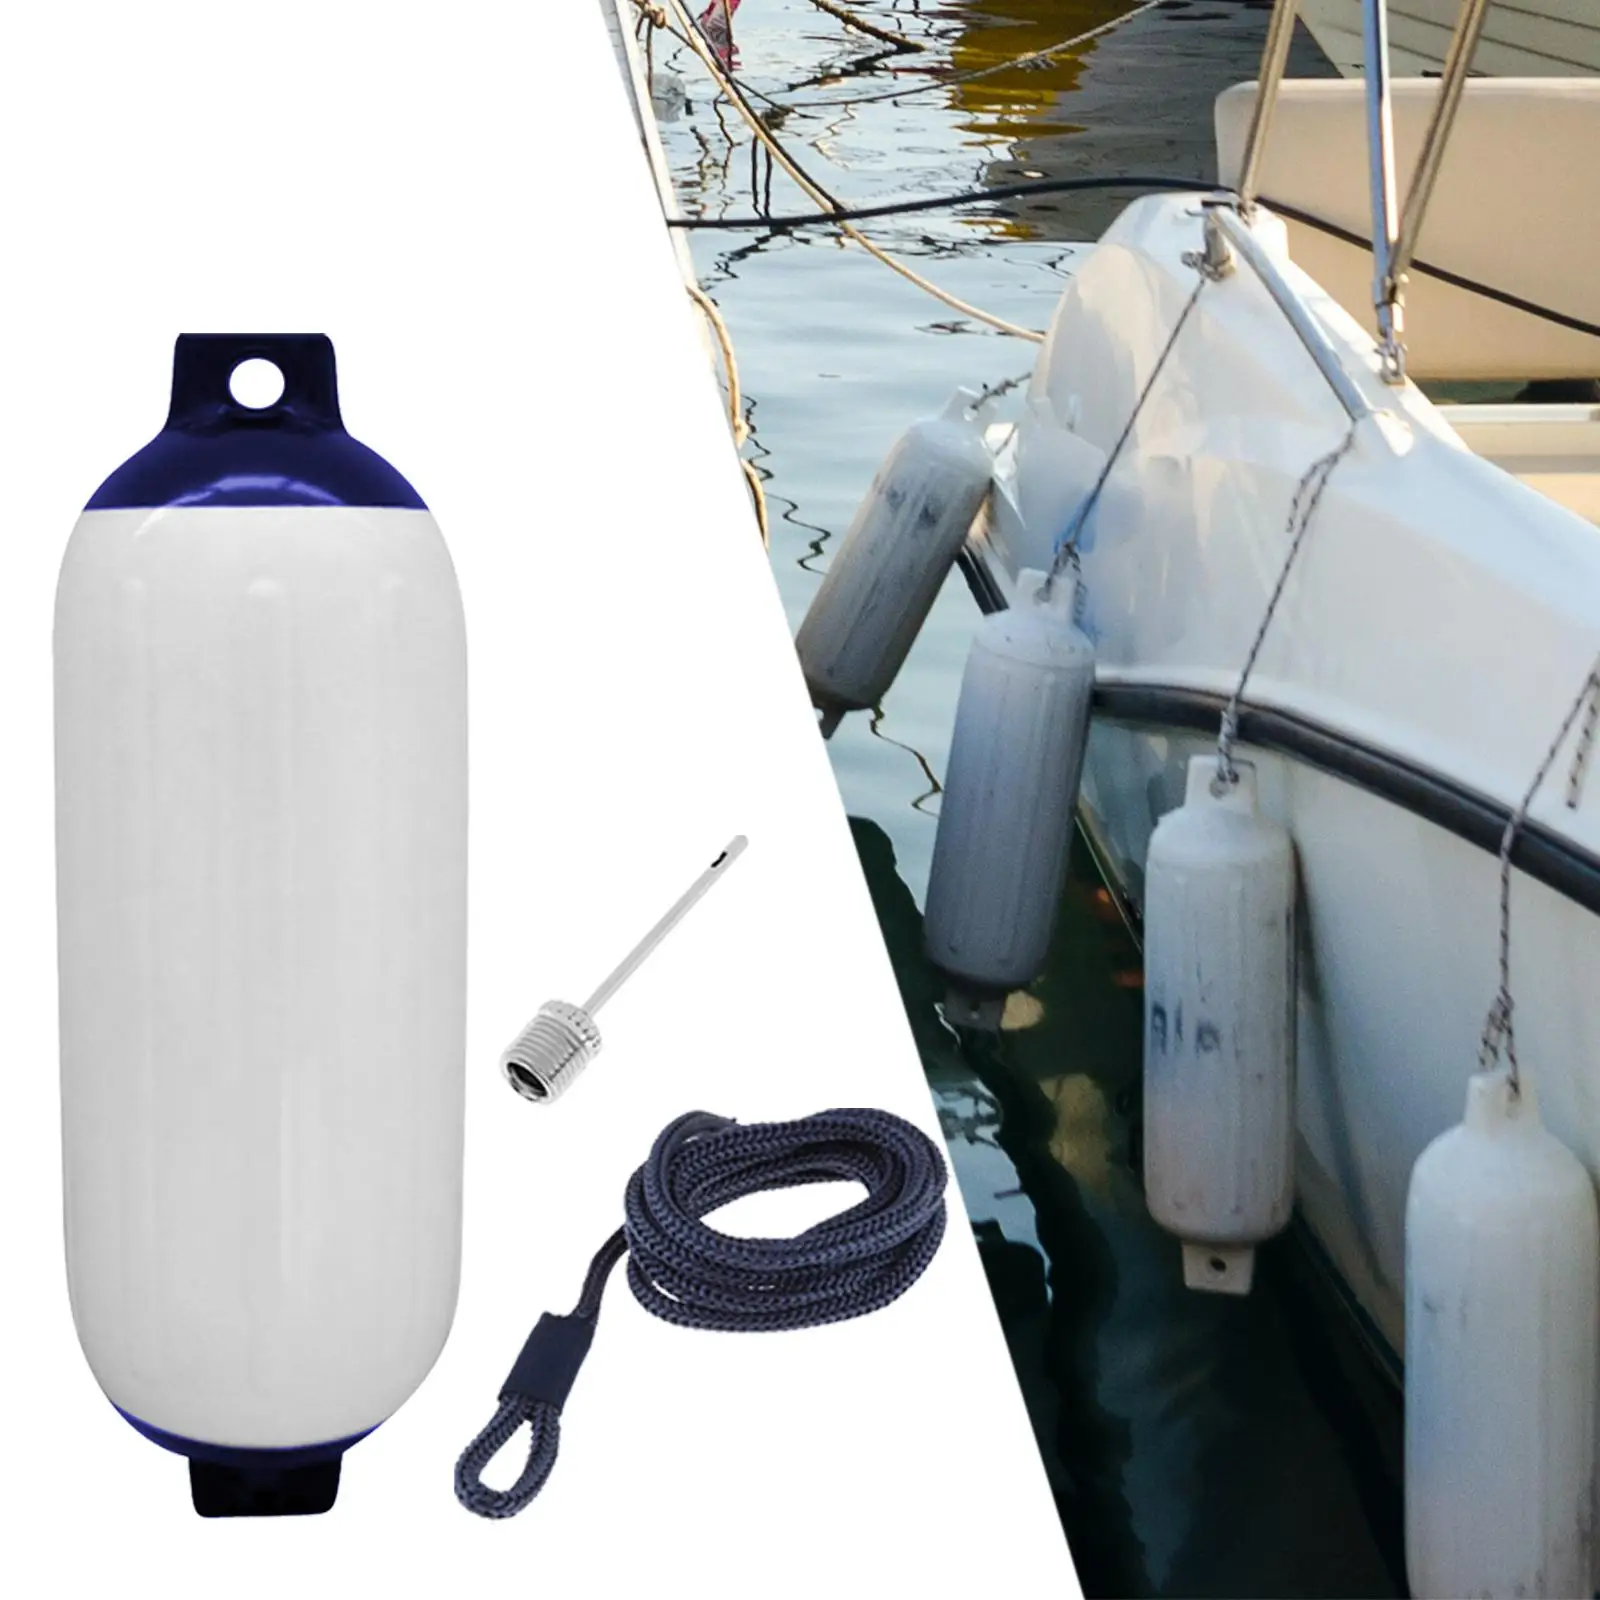 Boat Fender Kit 4x16inch with Rope and Needle Boat Bumper Protector for Docking